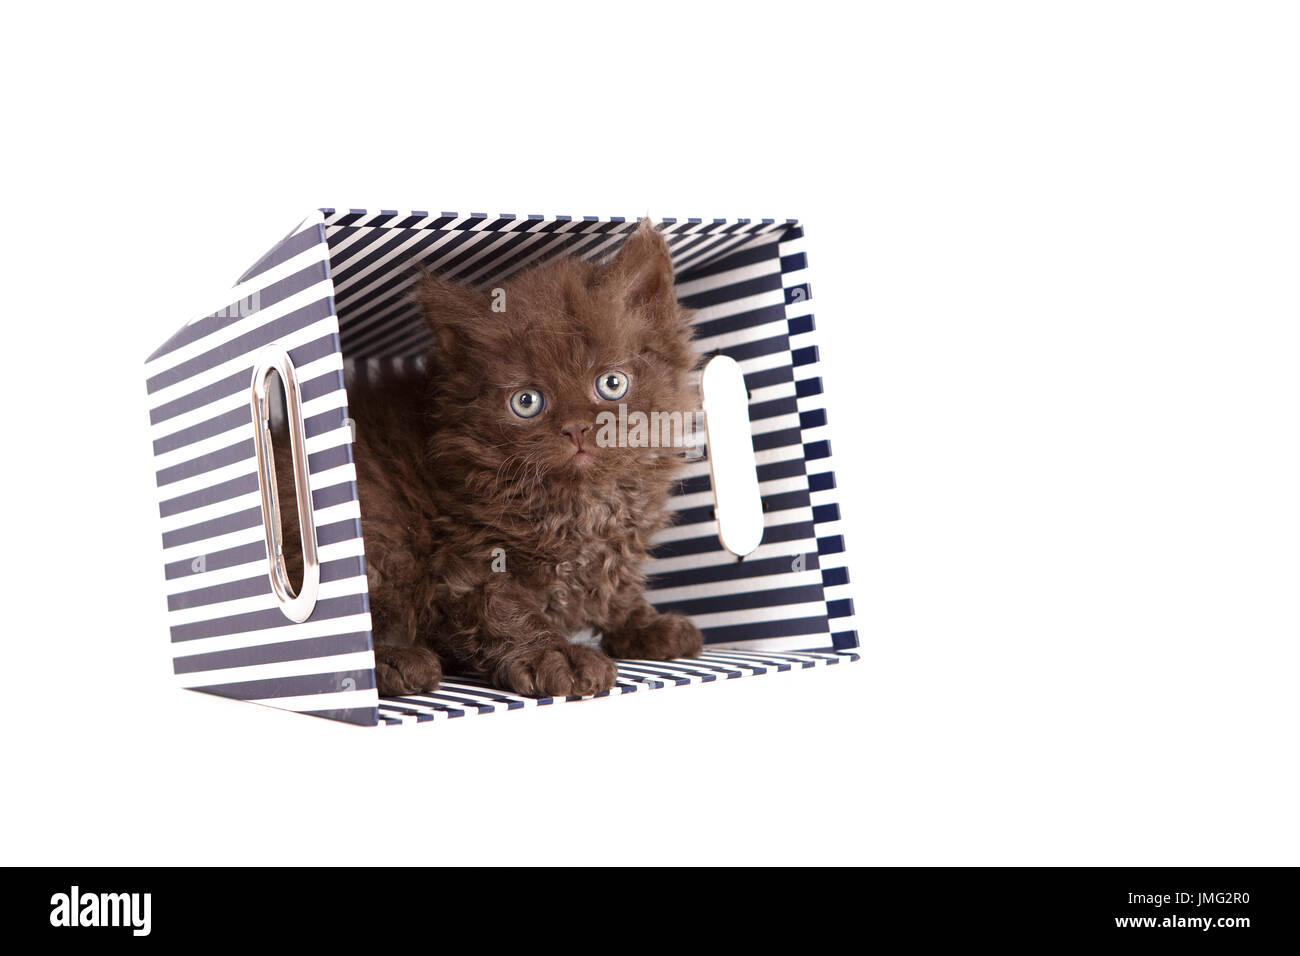 Selkirk Rex. Kitten (6 weeks old) sitting in cardboard box. Studio picture against a white background. Germany Stock Photo